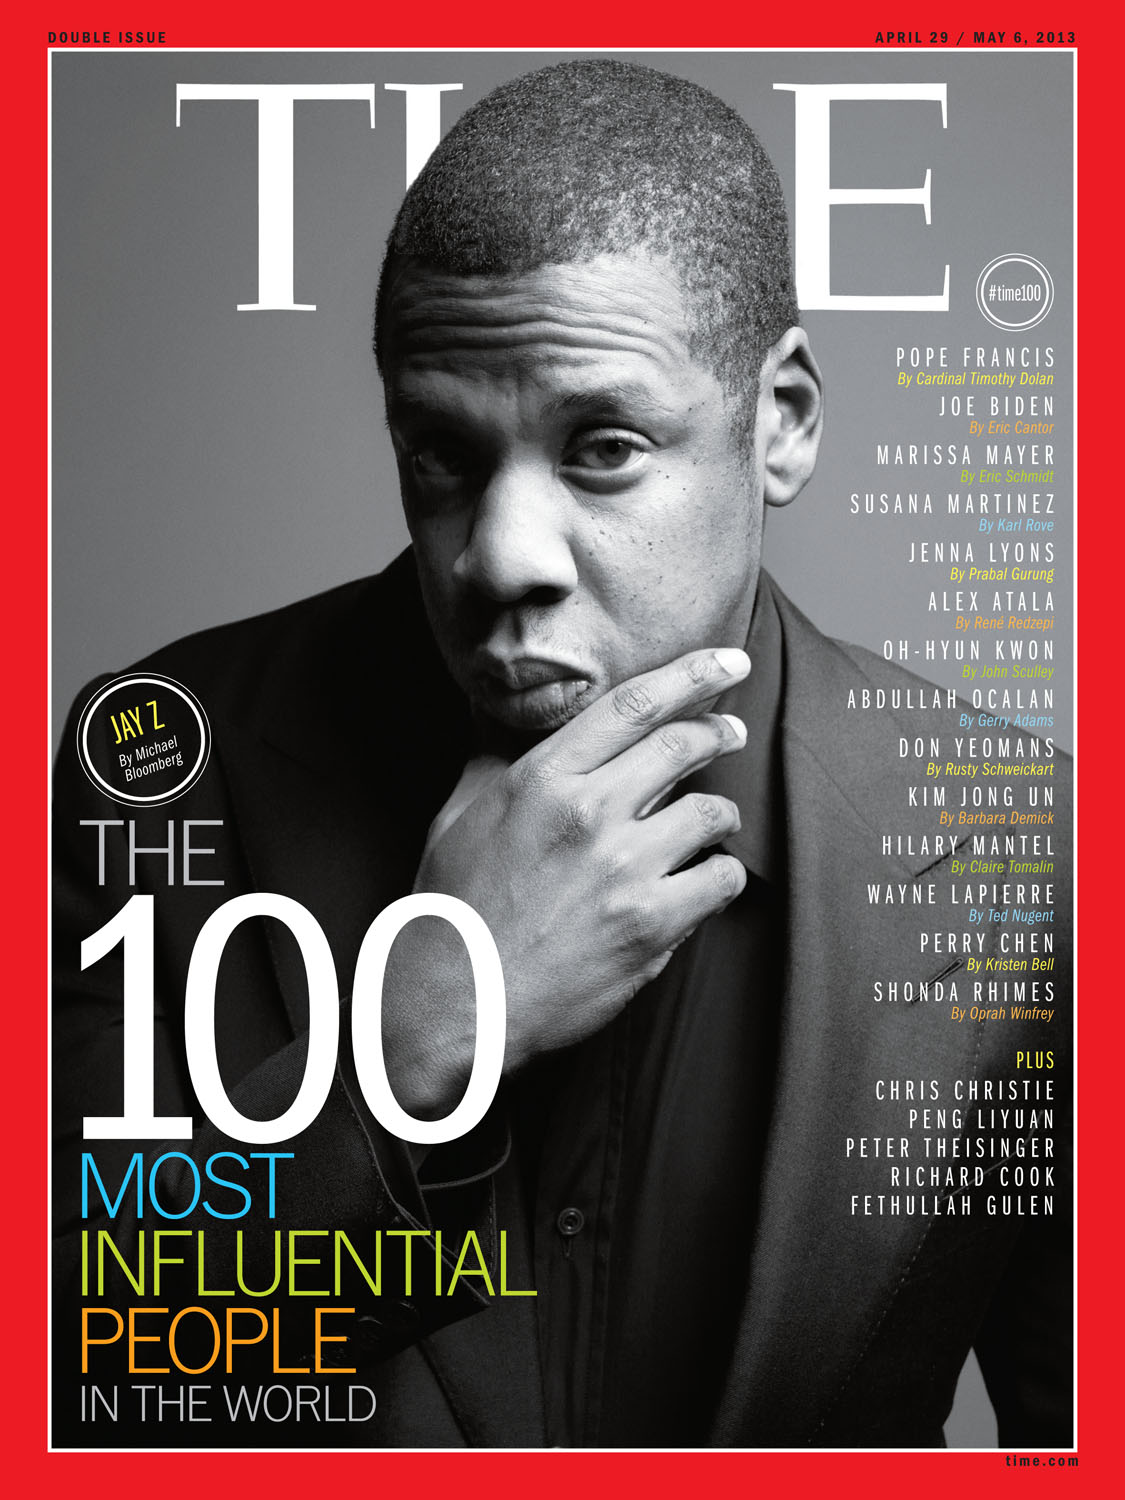 TIME Magazine Cover, April 29 / May 6, 2013